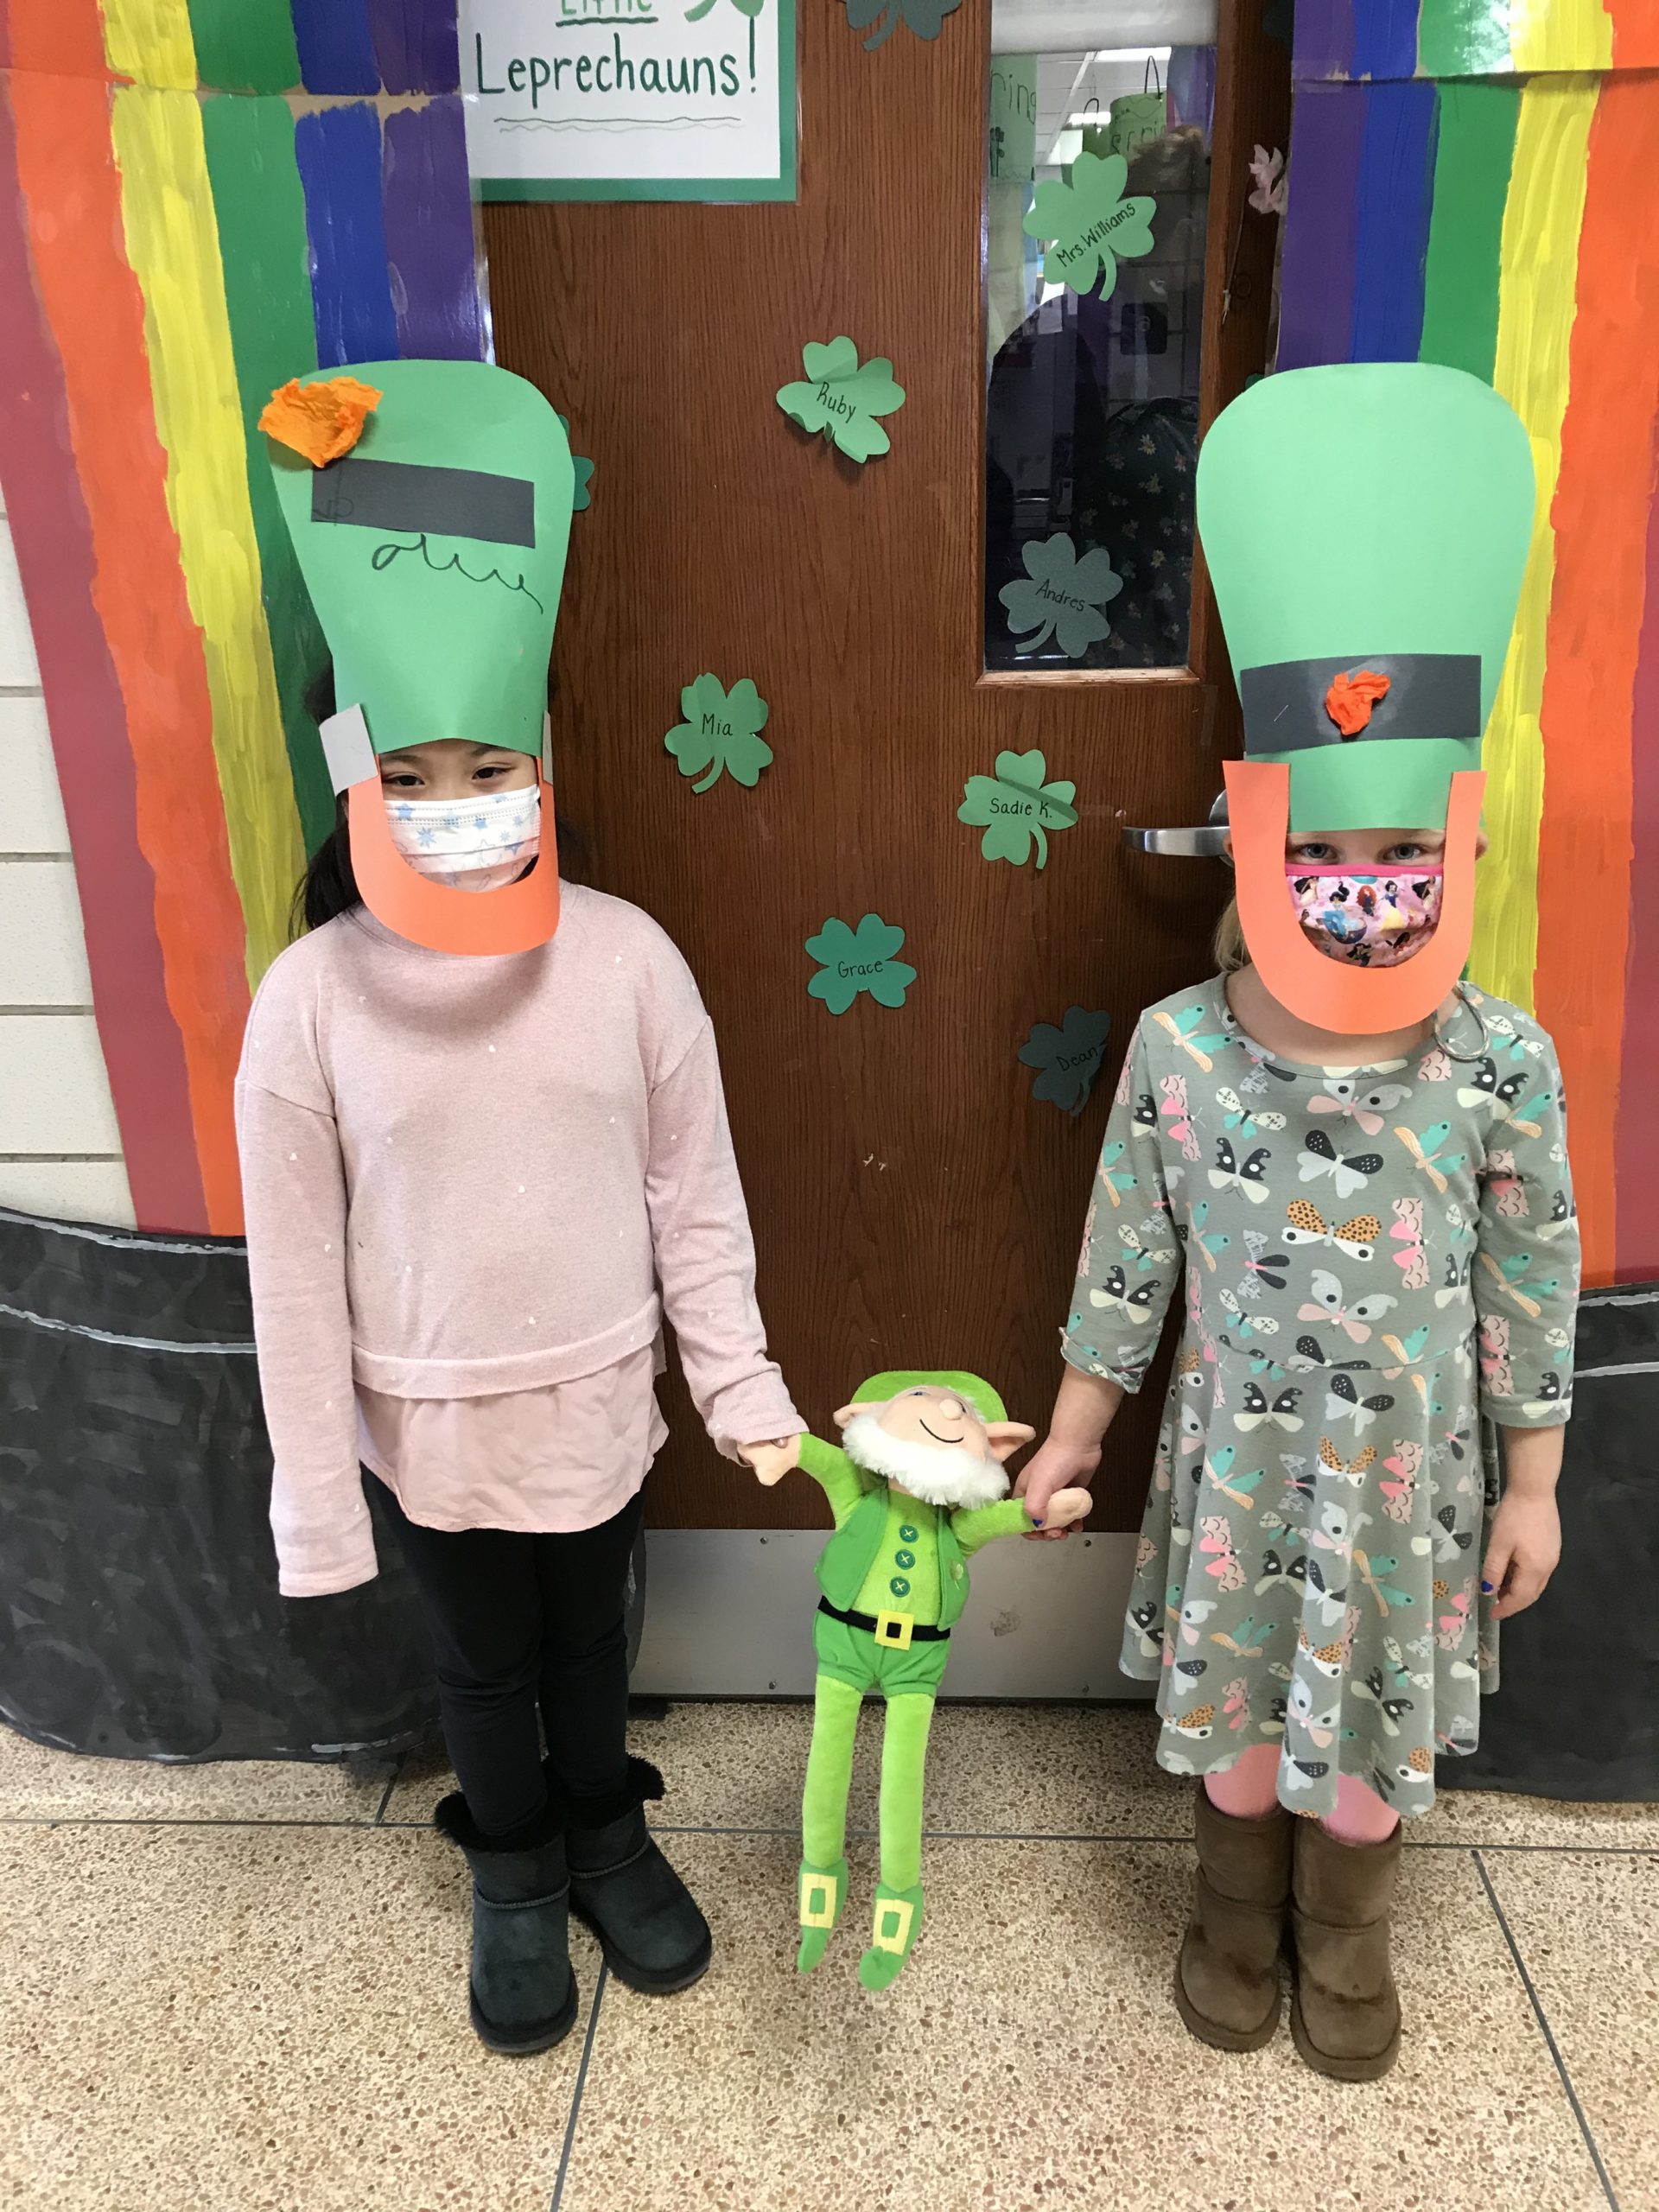 To celebrate St. Patrick’s Day, June Eaton’s kindergarten class at Hampton Bays Elementary School constructed leprechaun hats, rainbows and pots of gold. They also read “The Leprechaun’s Treasure” and plan to build their very own leprechaun traps.